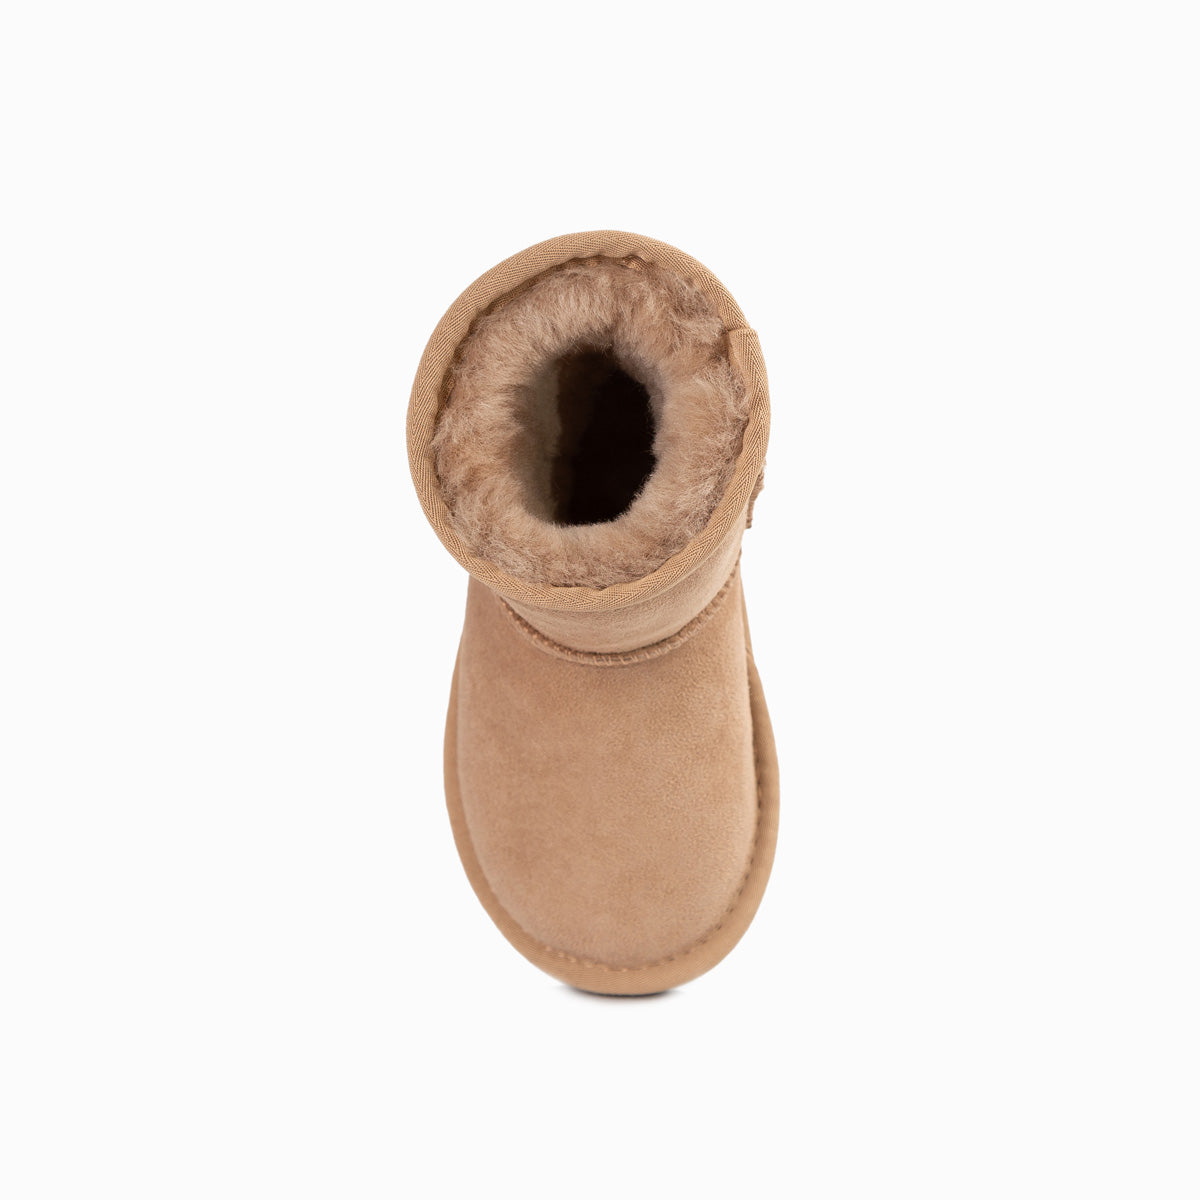 UGG Kids Classic Long Boots Water-Resistant